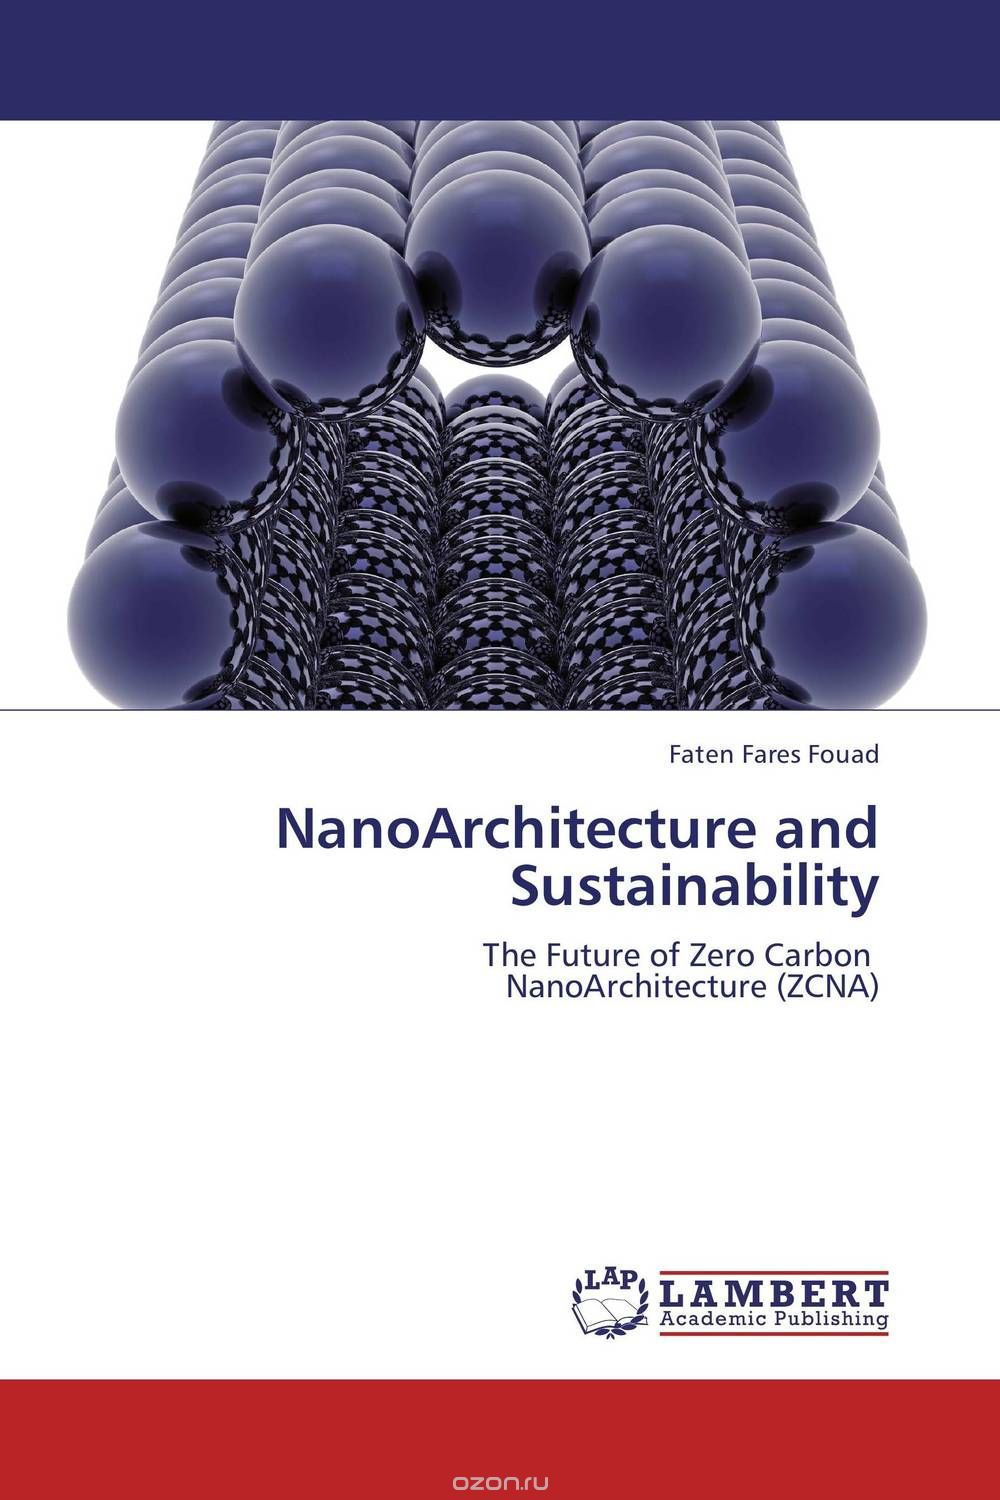 NanoArchitecture and Sustainability